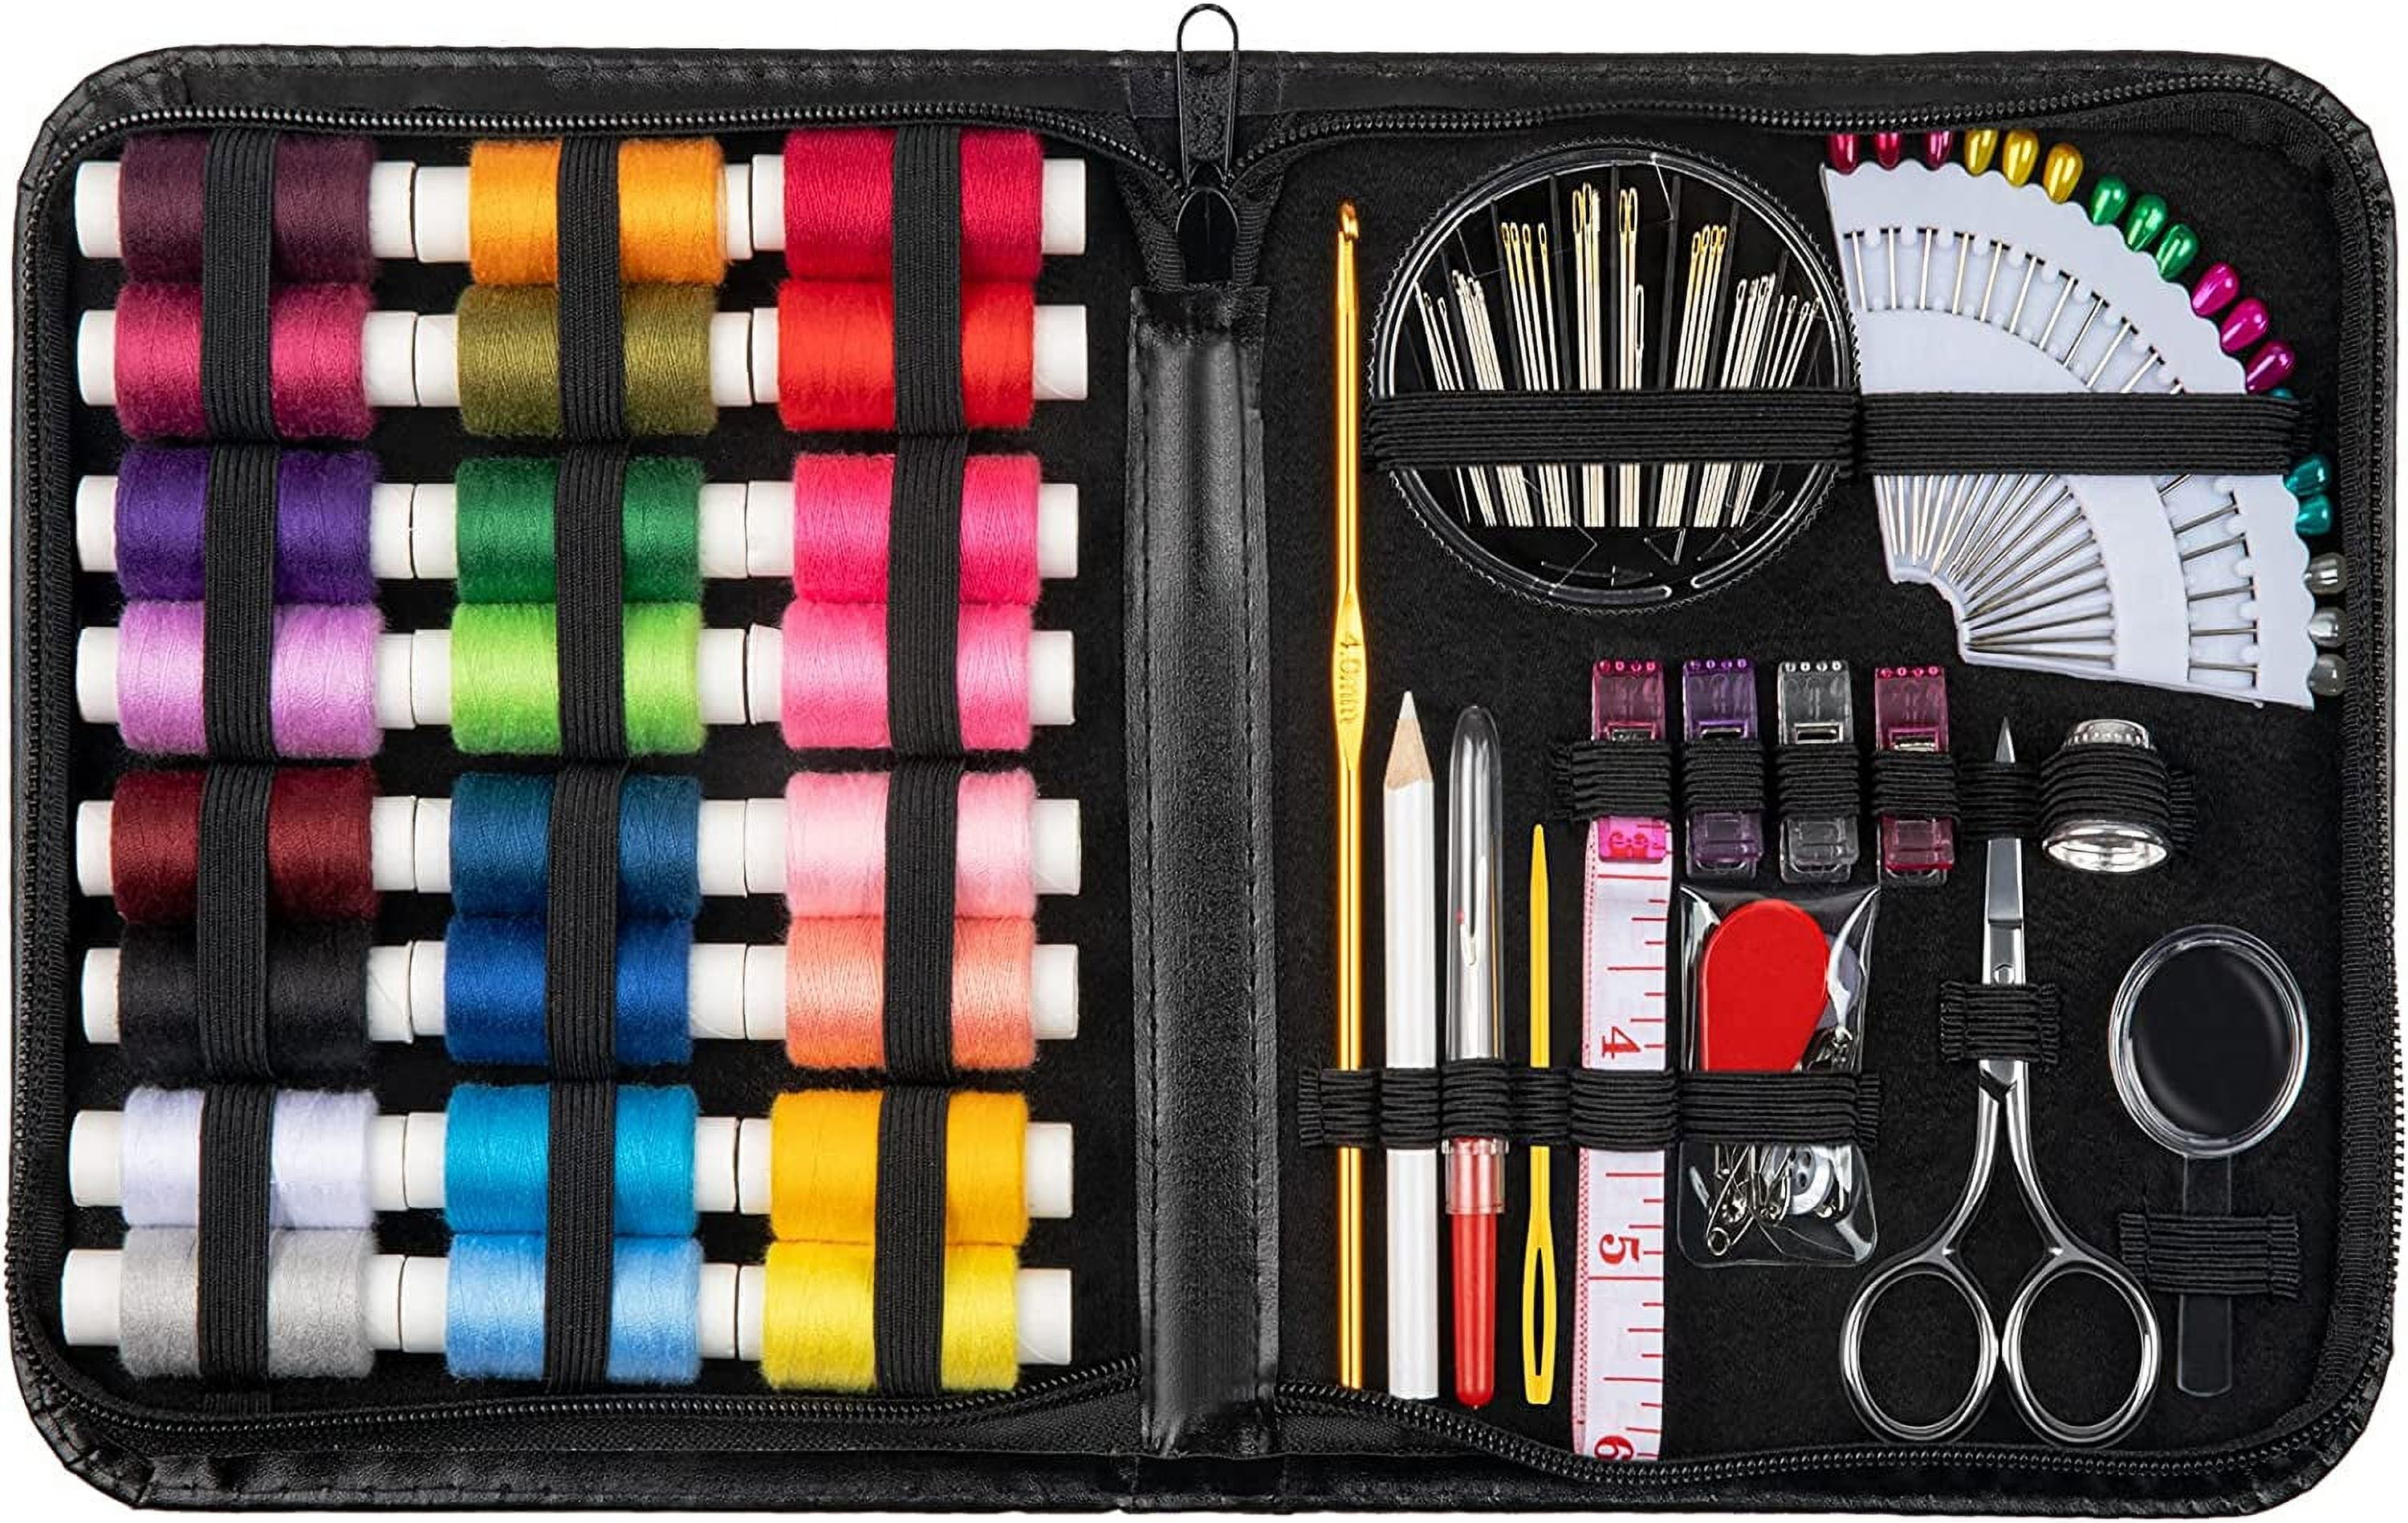  Brasenia Portable Sewing Kit with Zipper Case - Sewing Supplies  for Adults, Women, Beginners,DIY Home, Travel Repairs - Includes 14 Colors  of Thread, Thimble, Sewing Needles etc. (23pcs/Set)